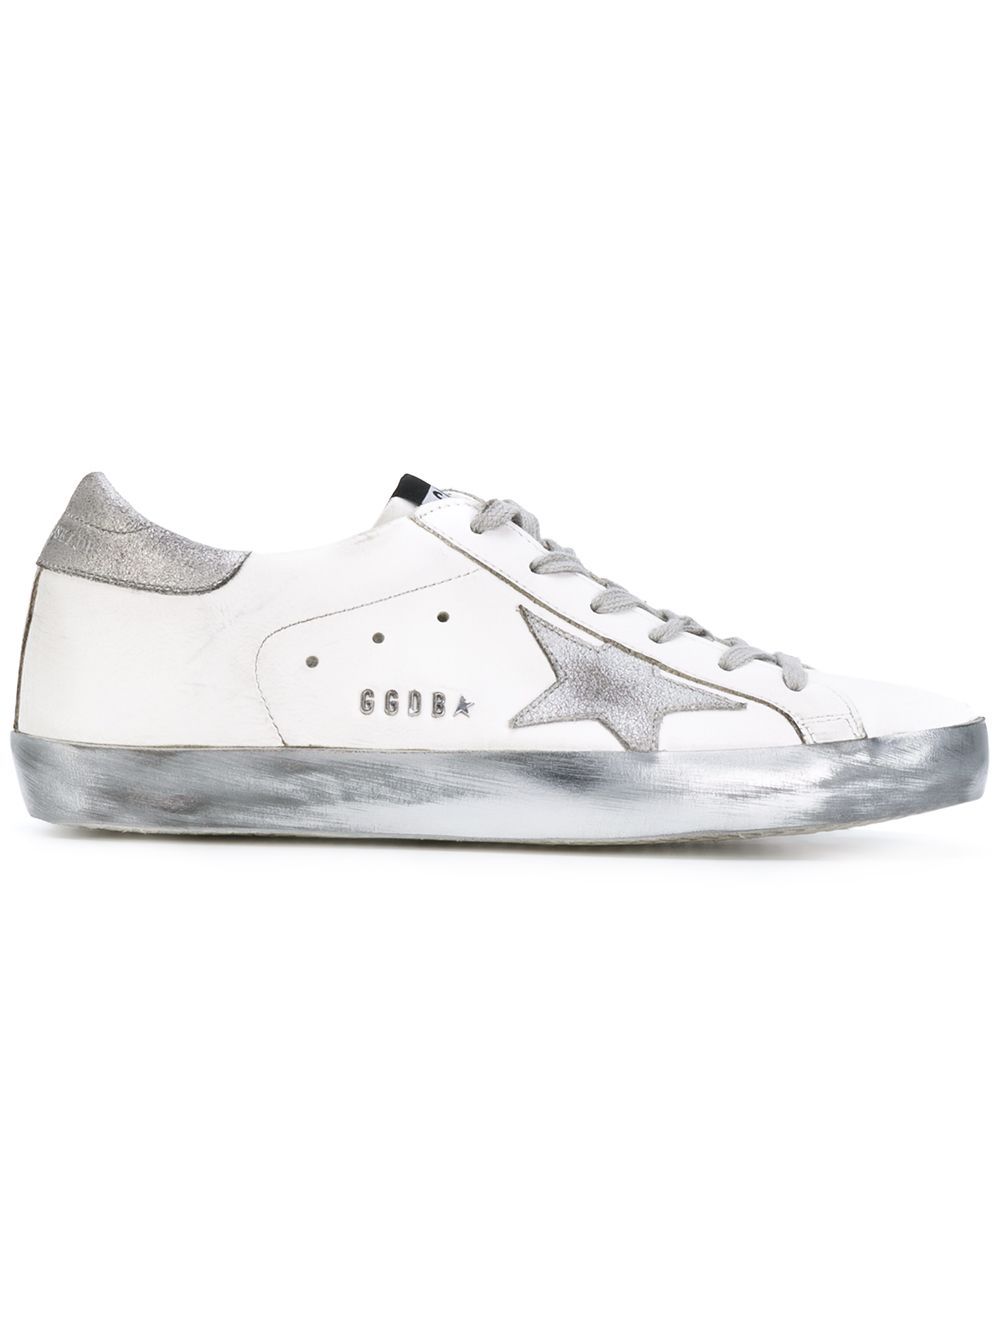 Golden Goose Deluxe Brand White Silver Sole Superstar sneakers | FarFetch Global